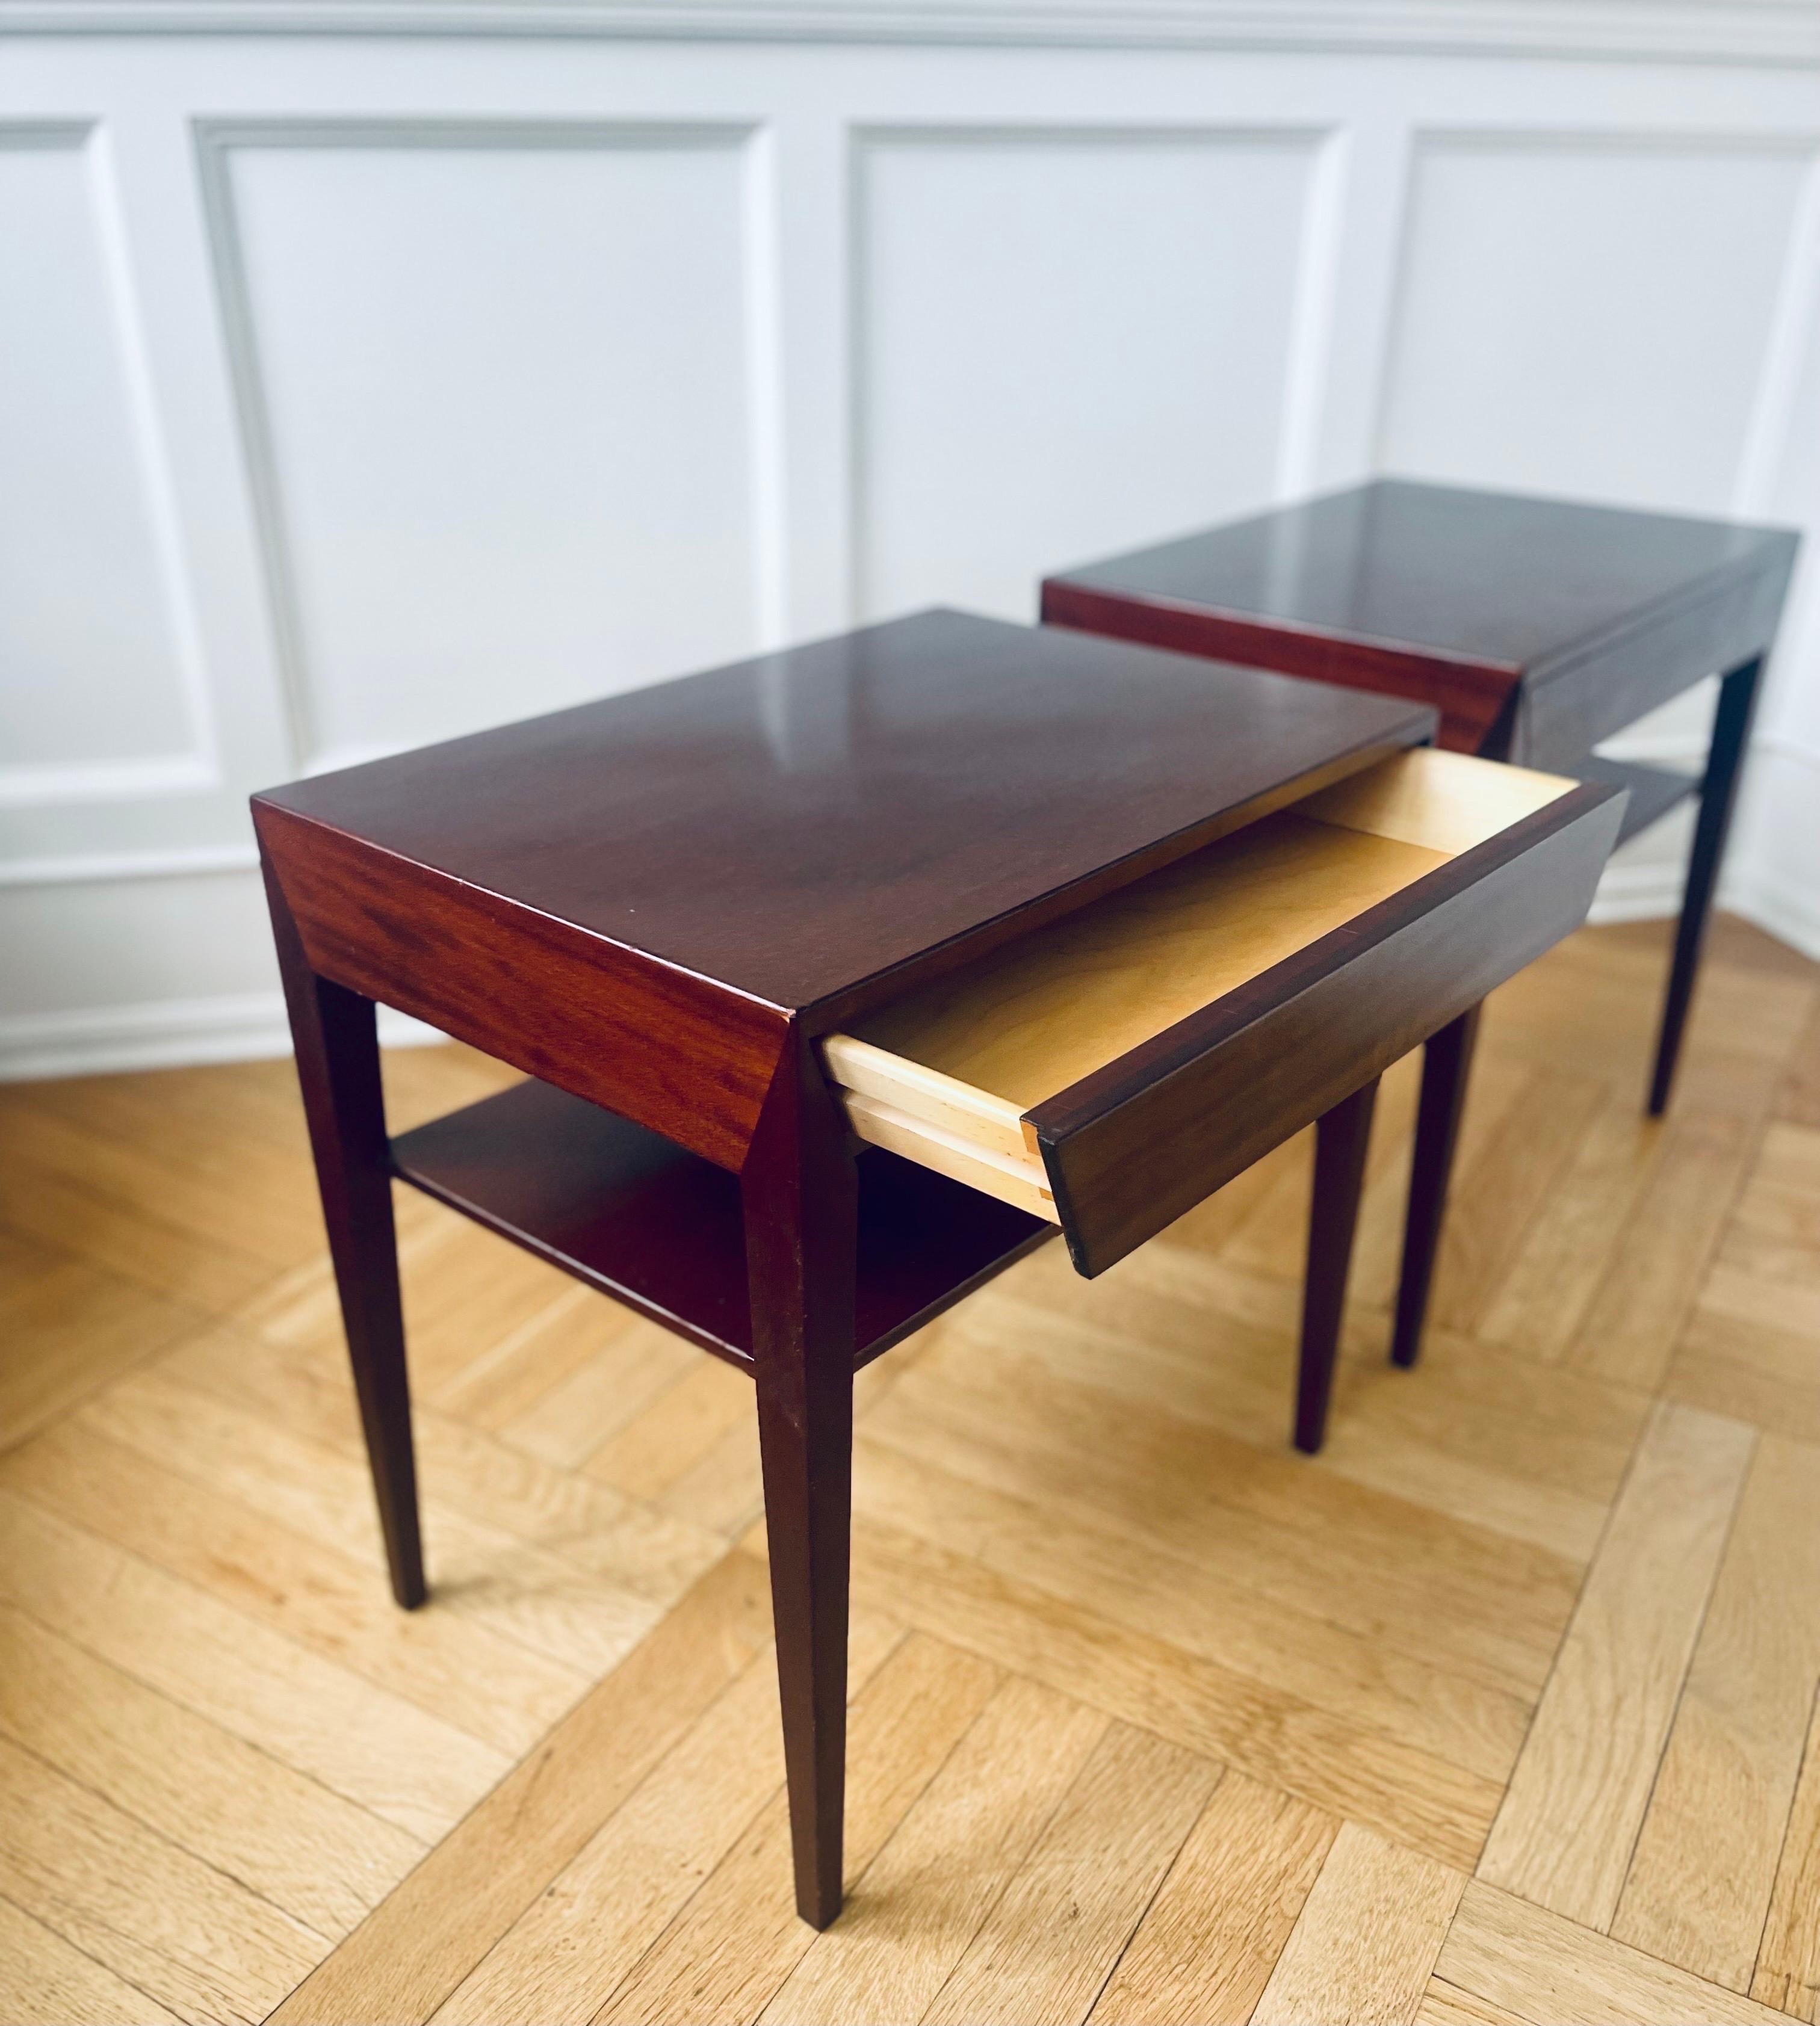 Stained Severin Hansen Bedside Tables in Mahogany, Denmark 1950s For Sale